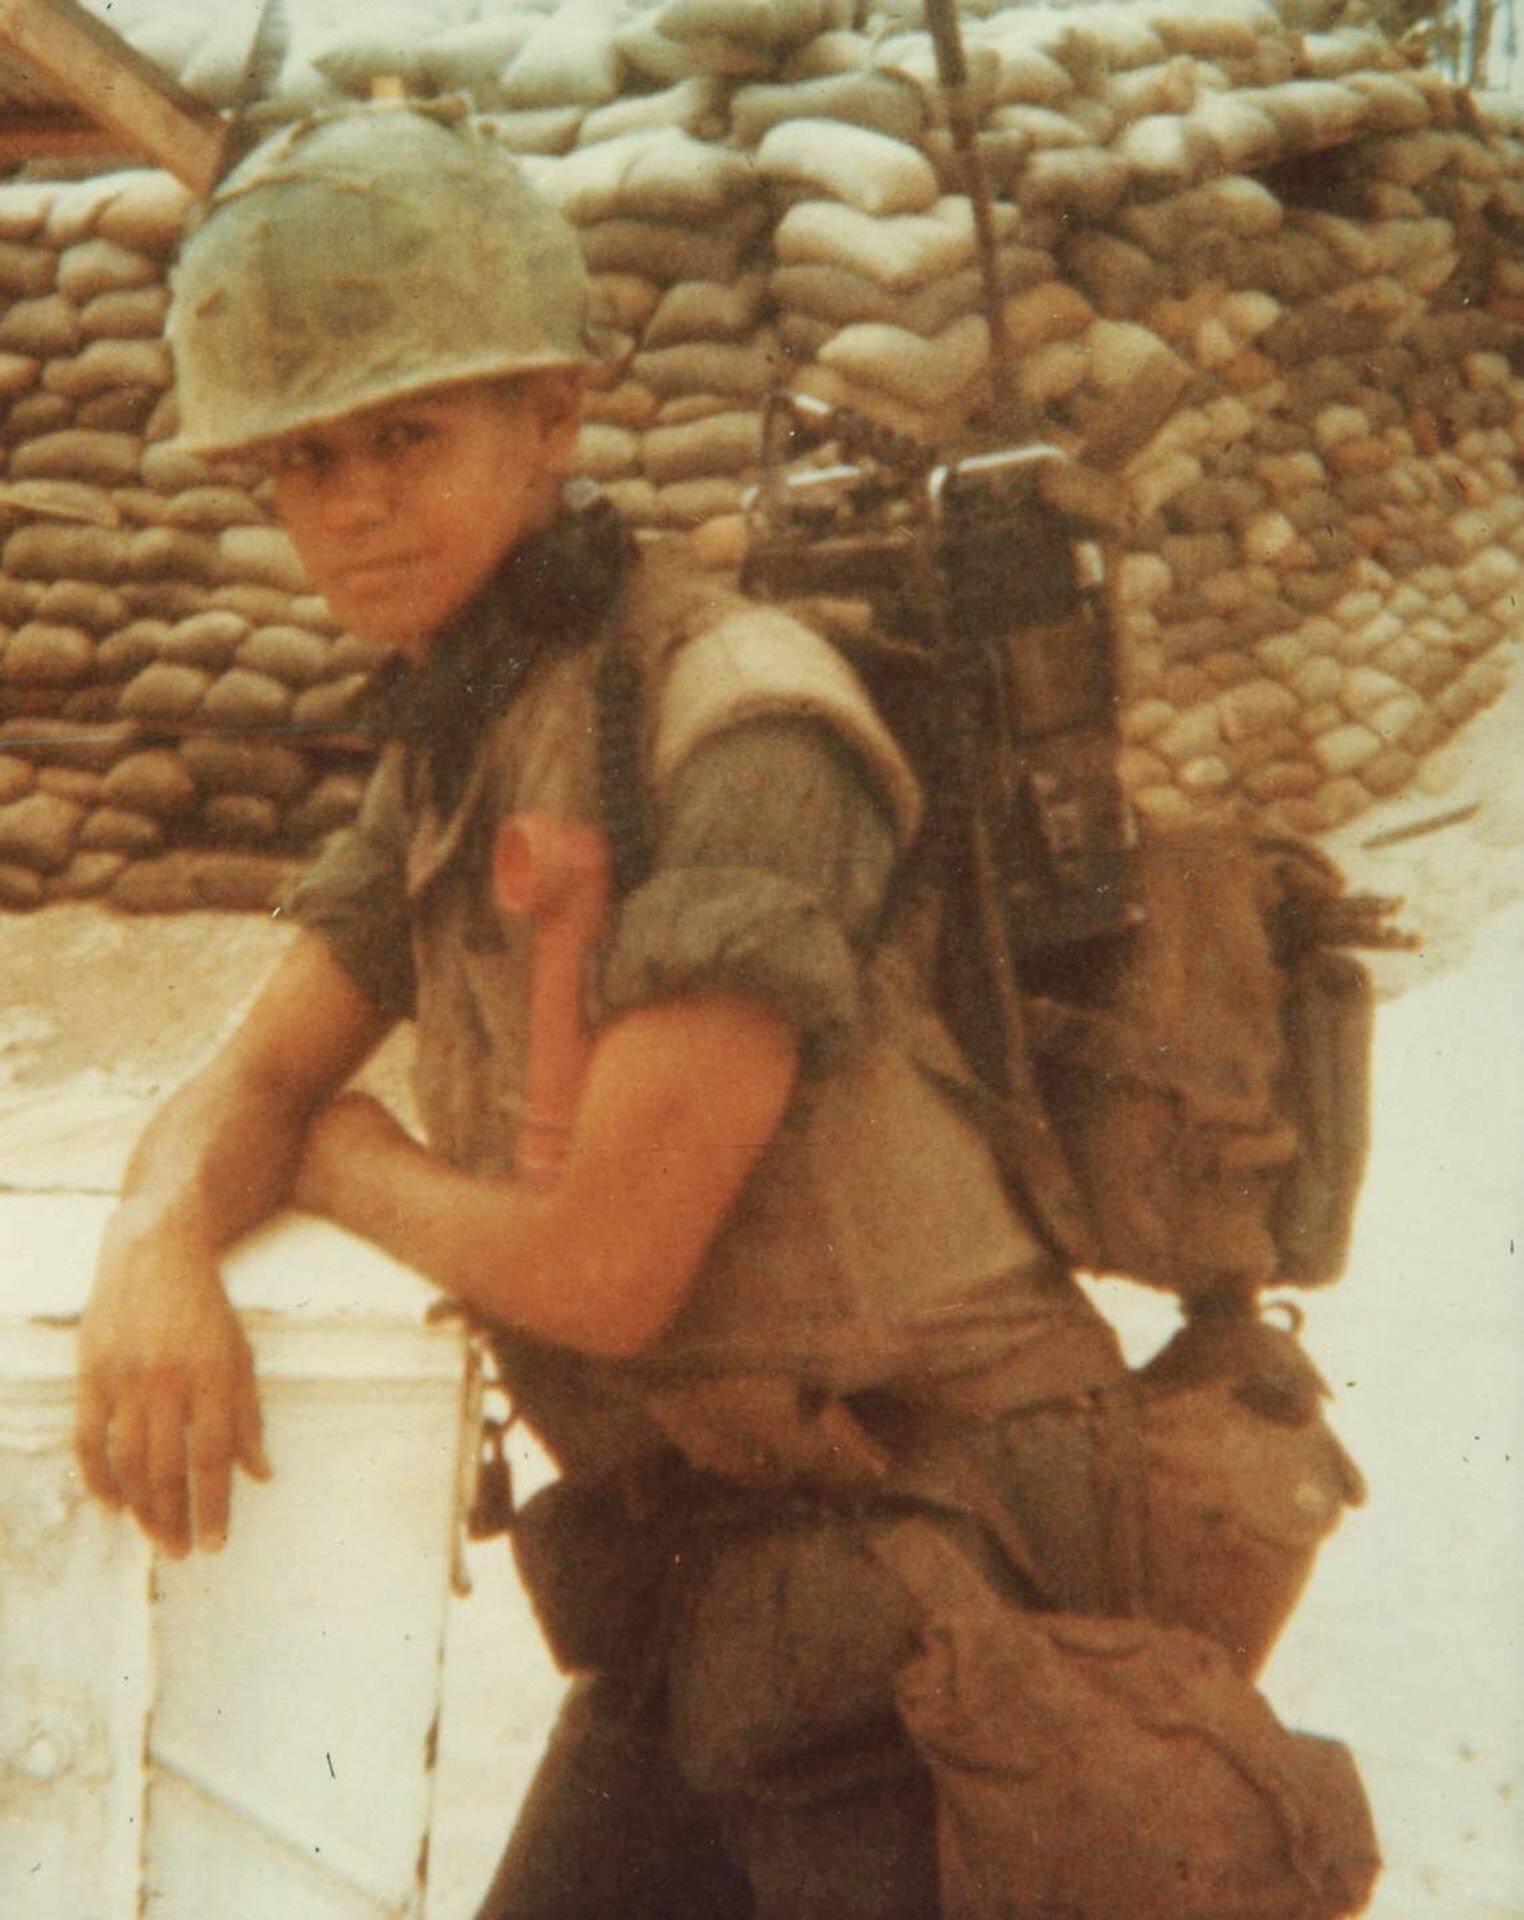 Cpl. Thomas Soliz suited up in Vietnam. Photo courtesy of the author.